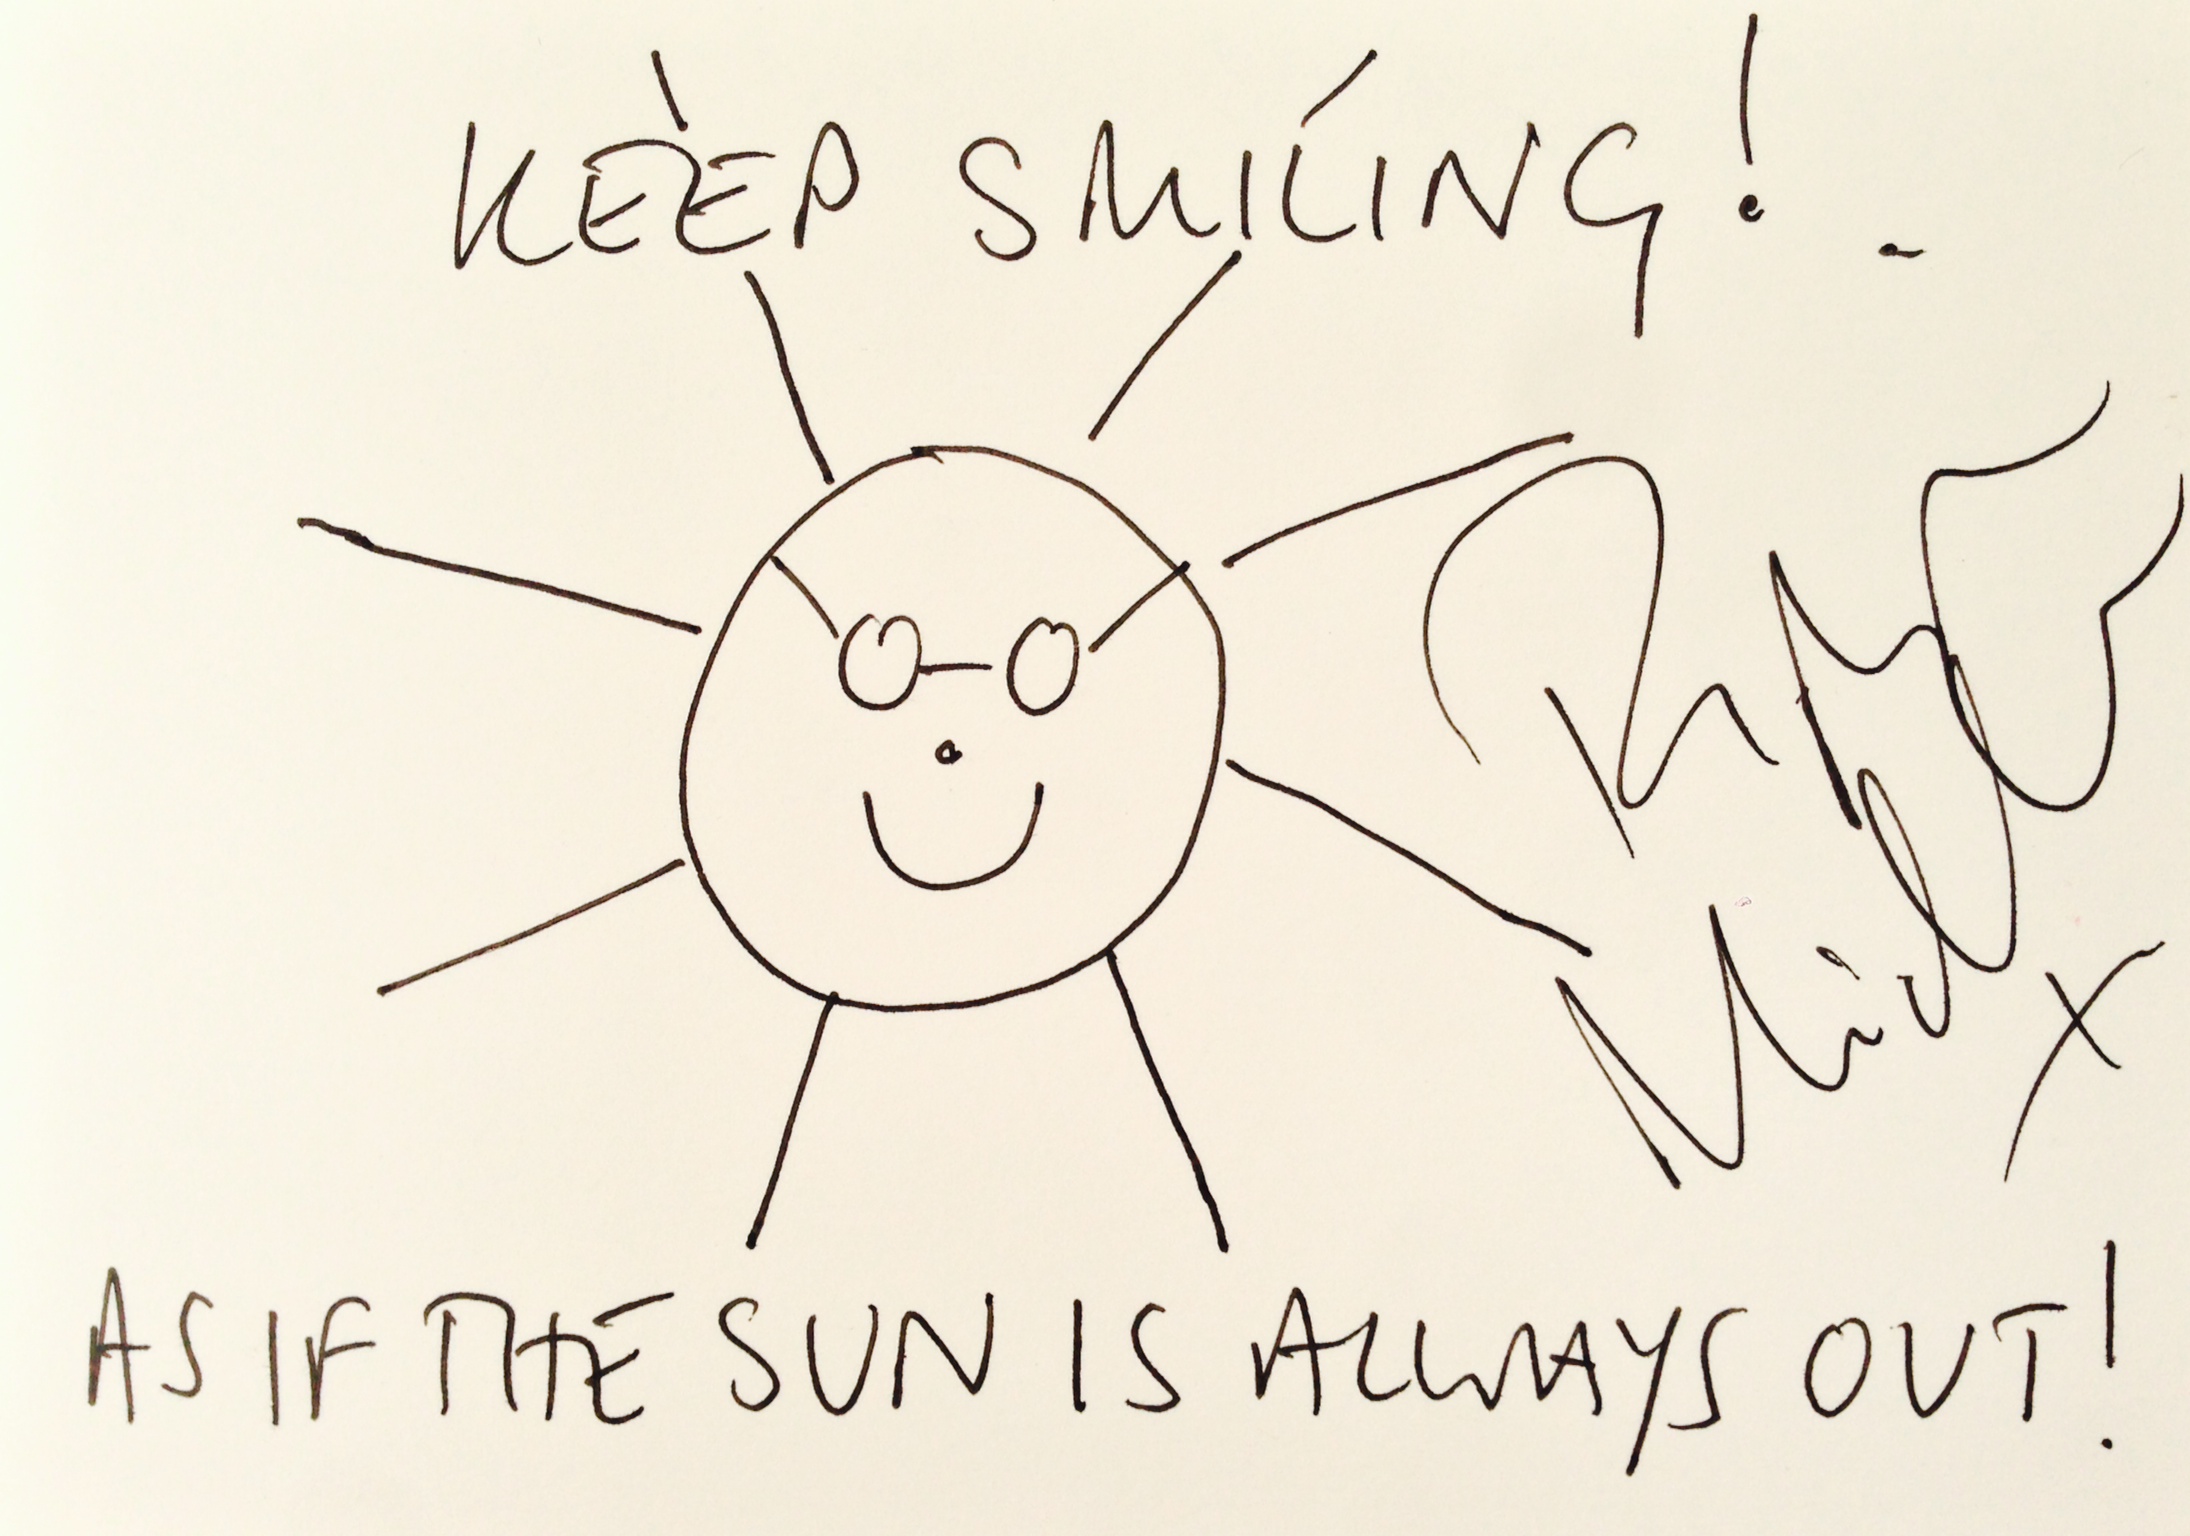 Pippa Middleton Untitled, signed and inscribed Keep Smiling! As if the Sun is Always Out! pen on